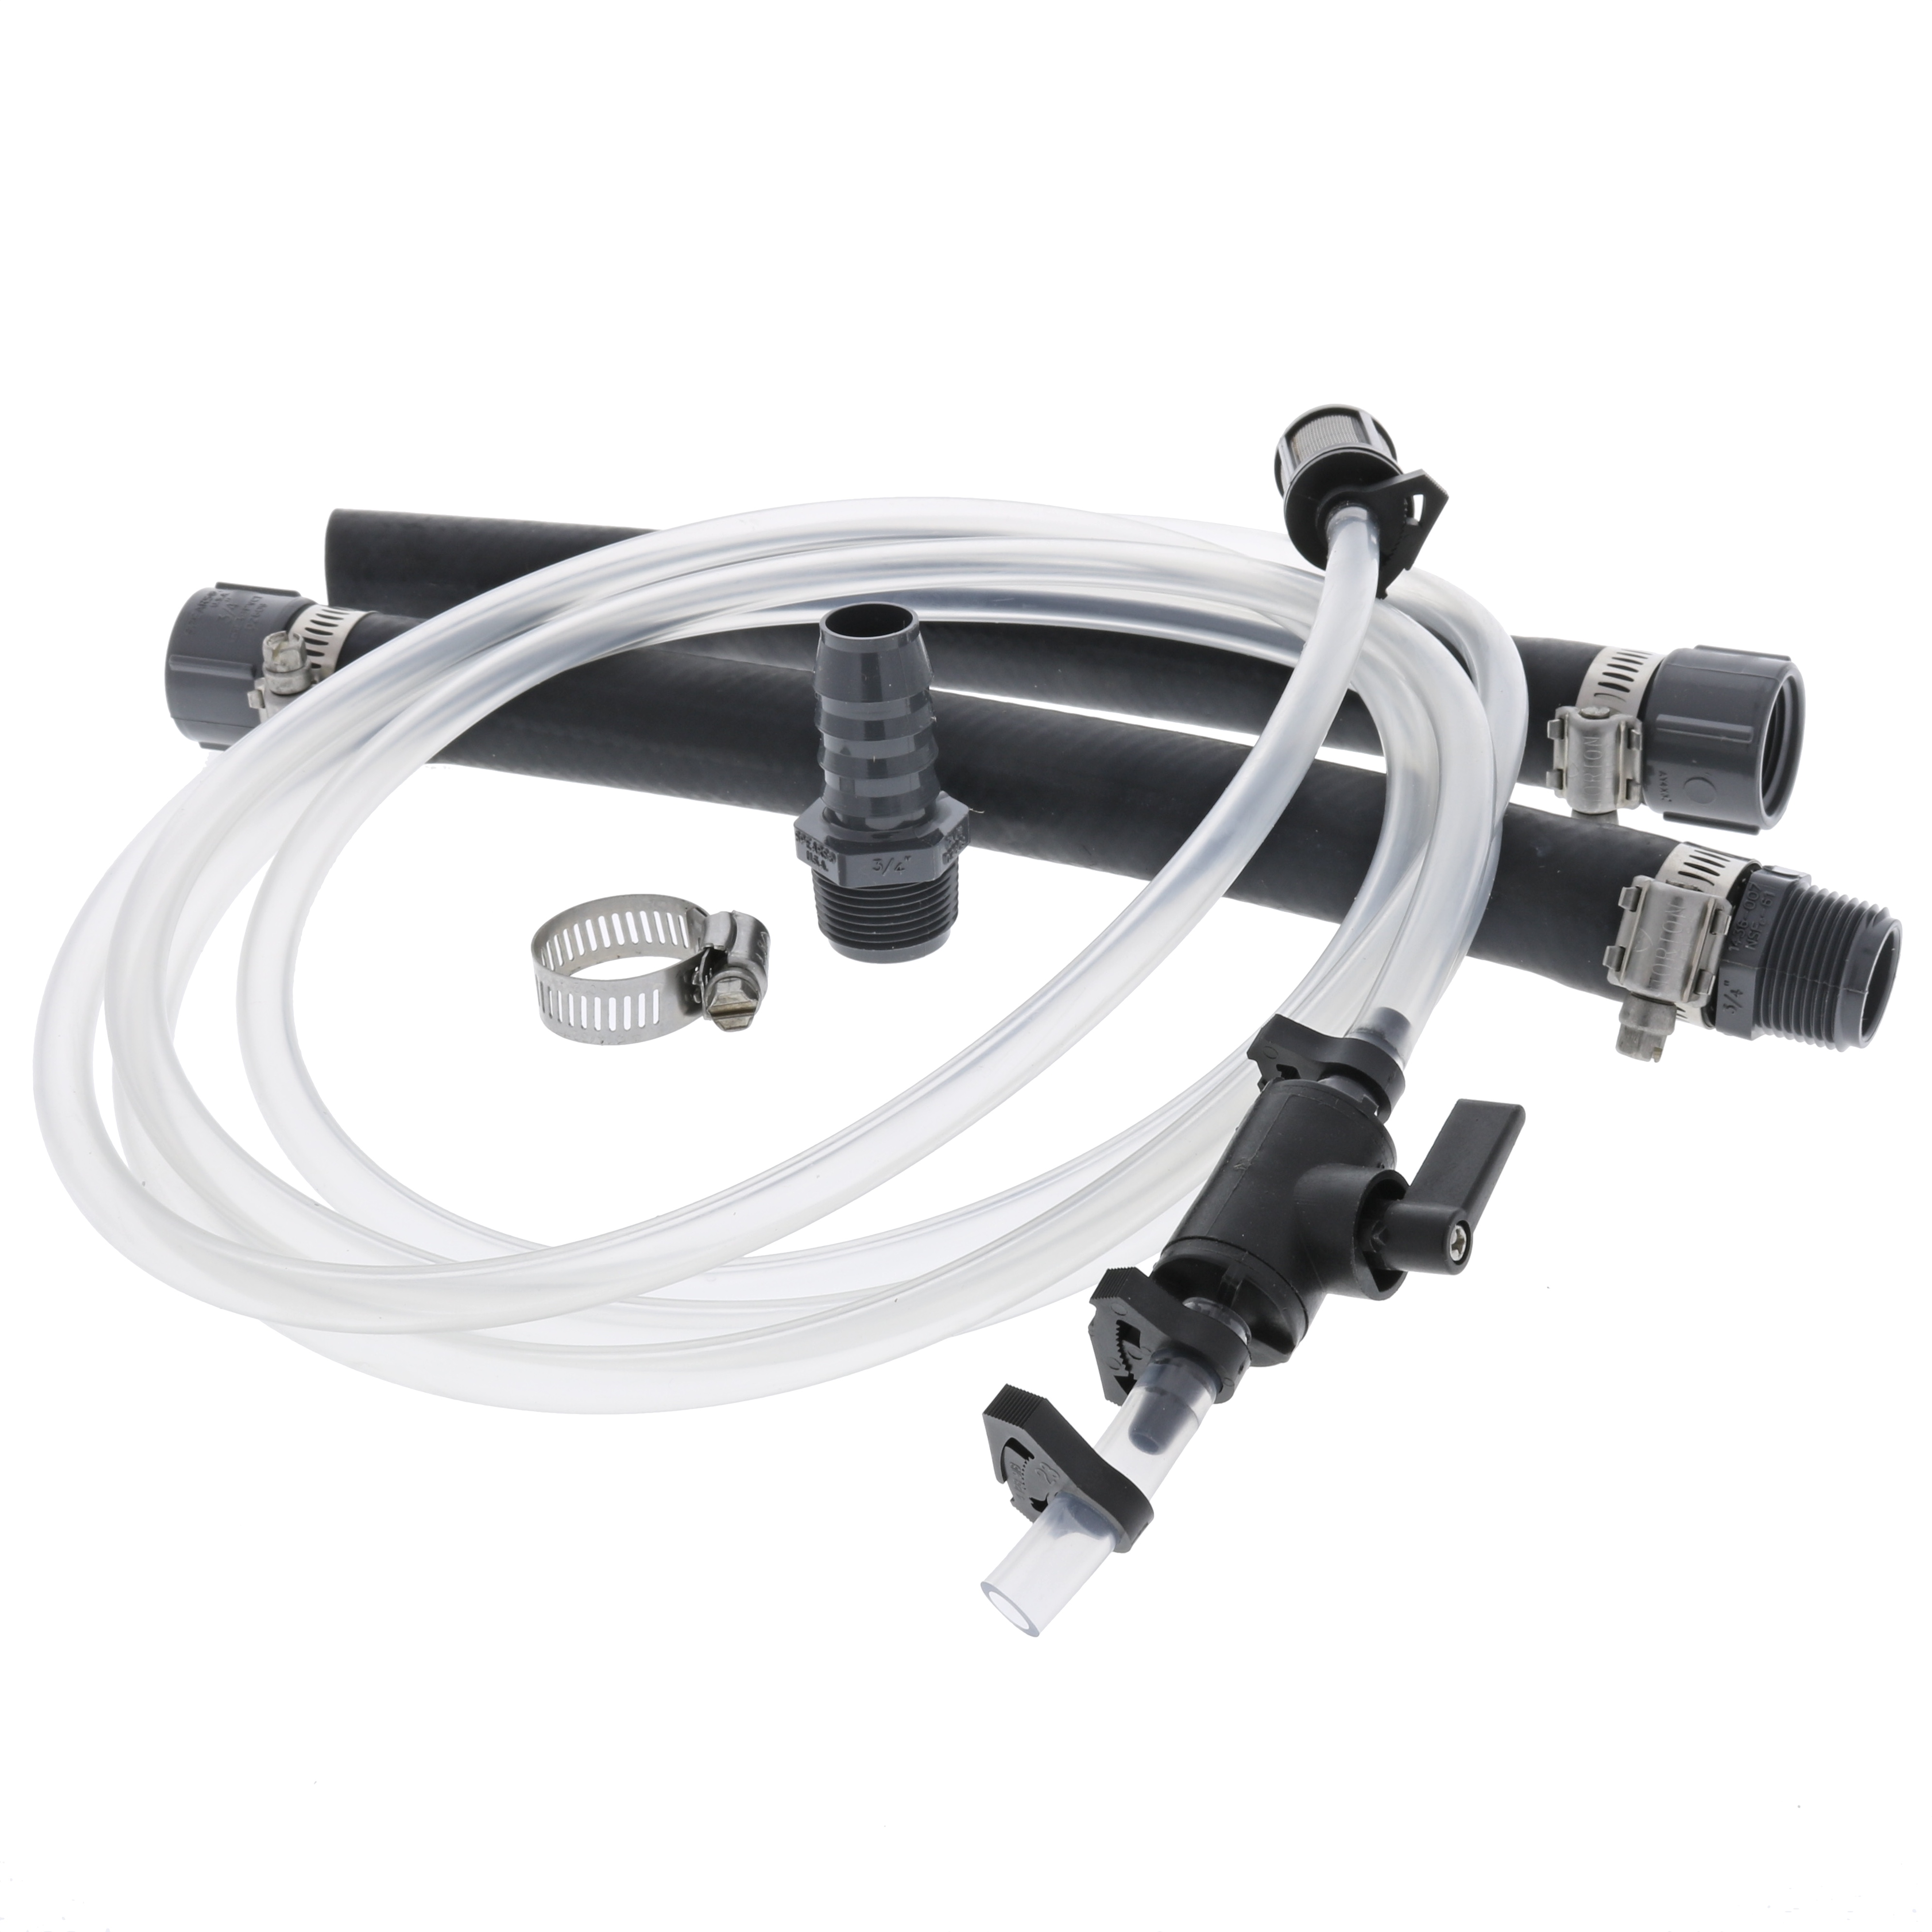 Mazzei injector bypass & suction kit - injector size : 3/4